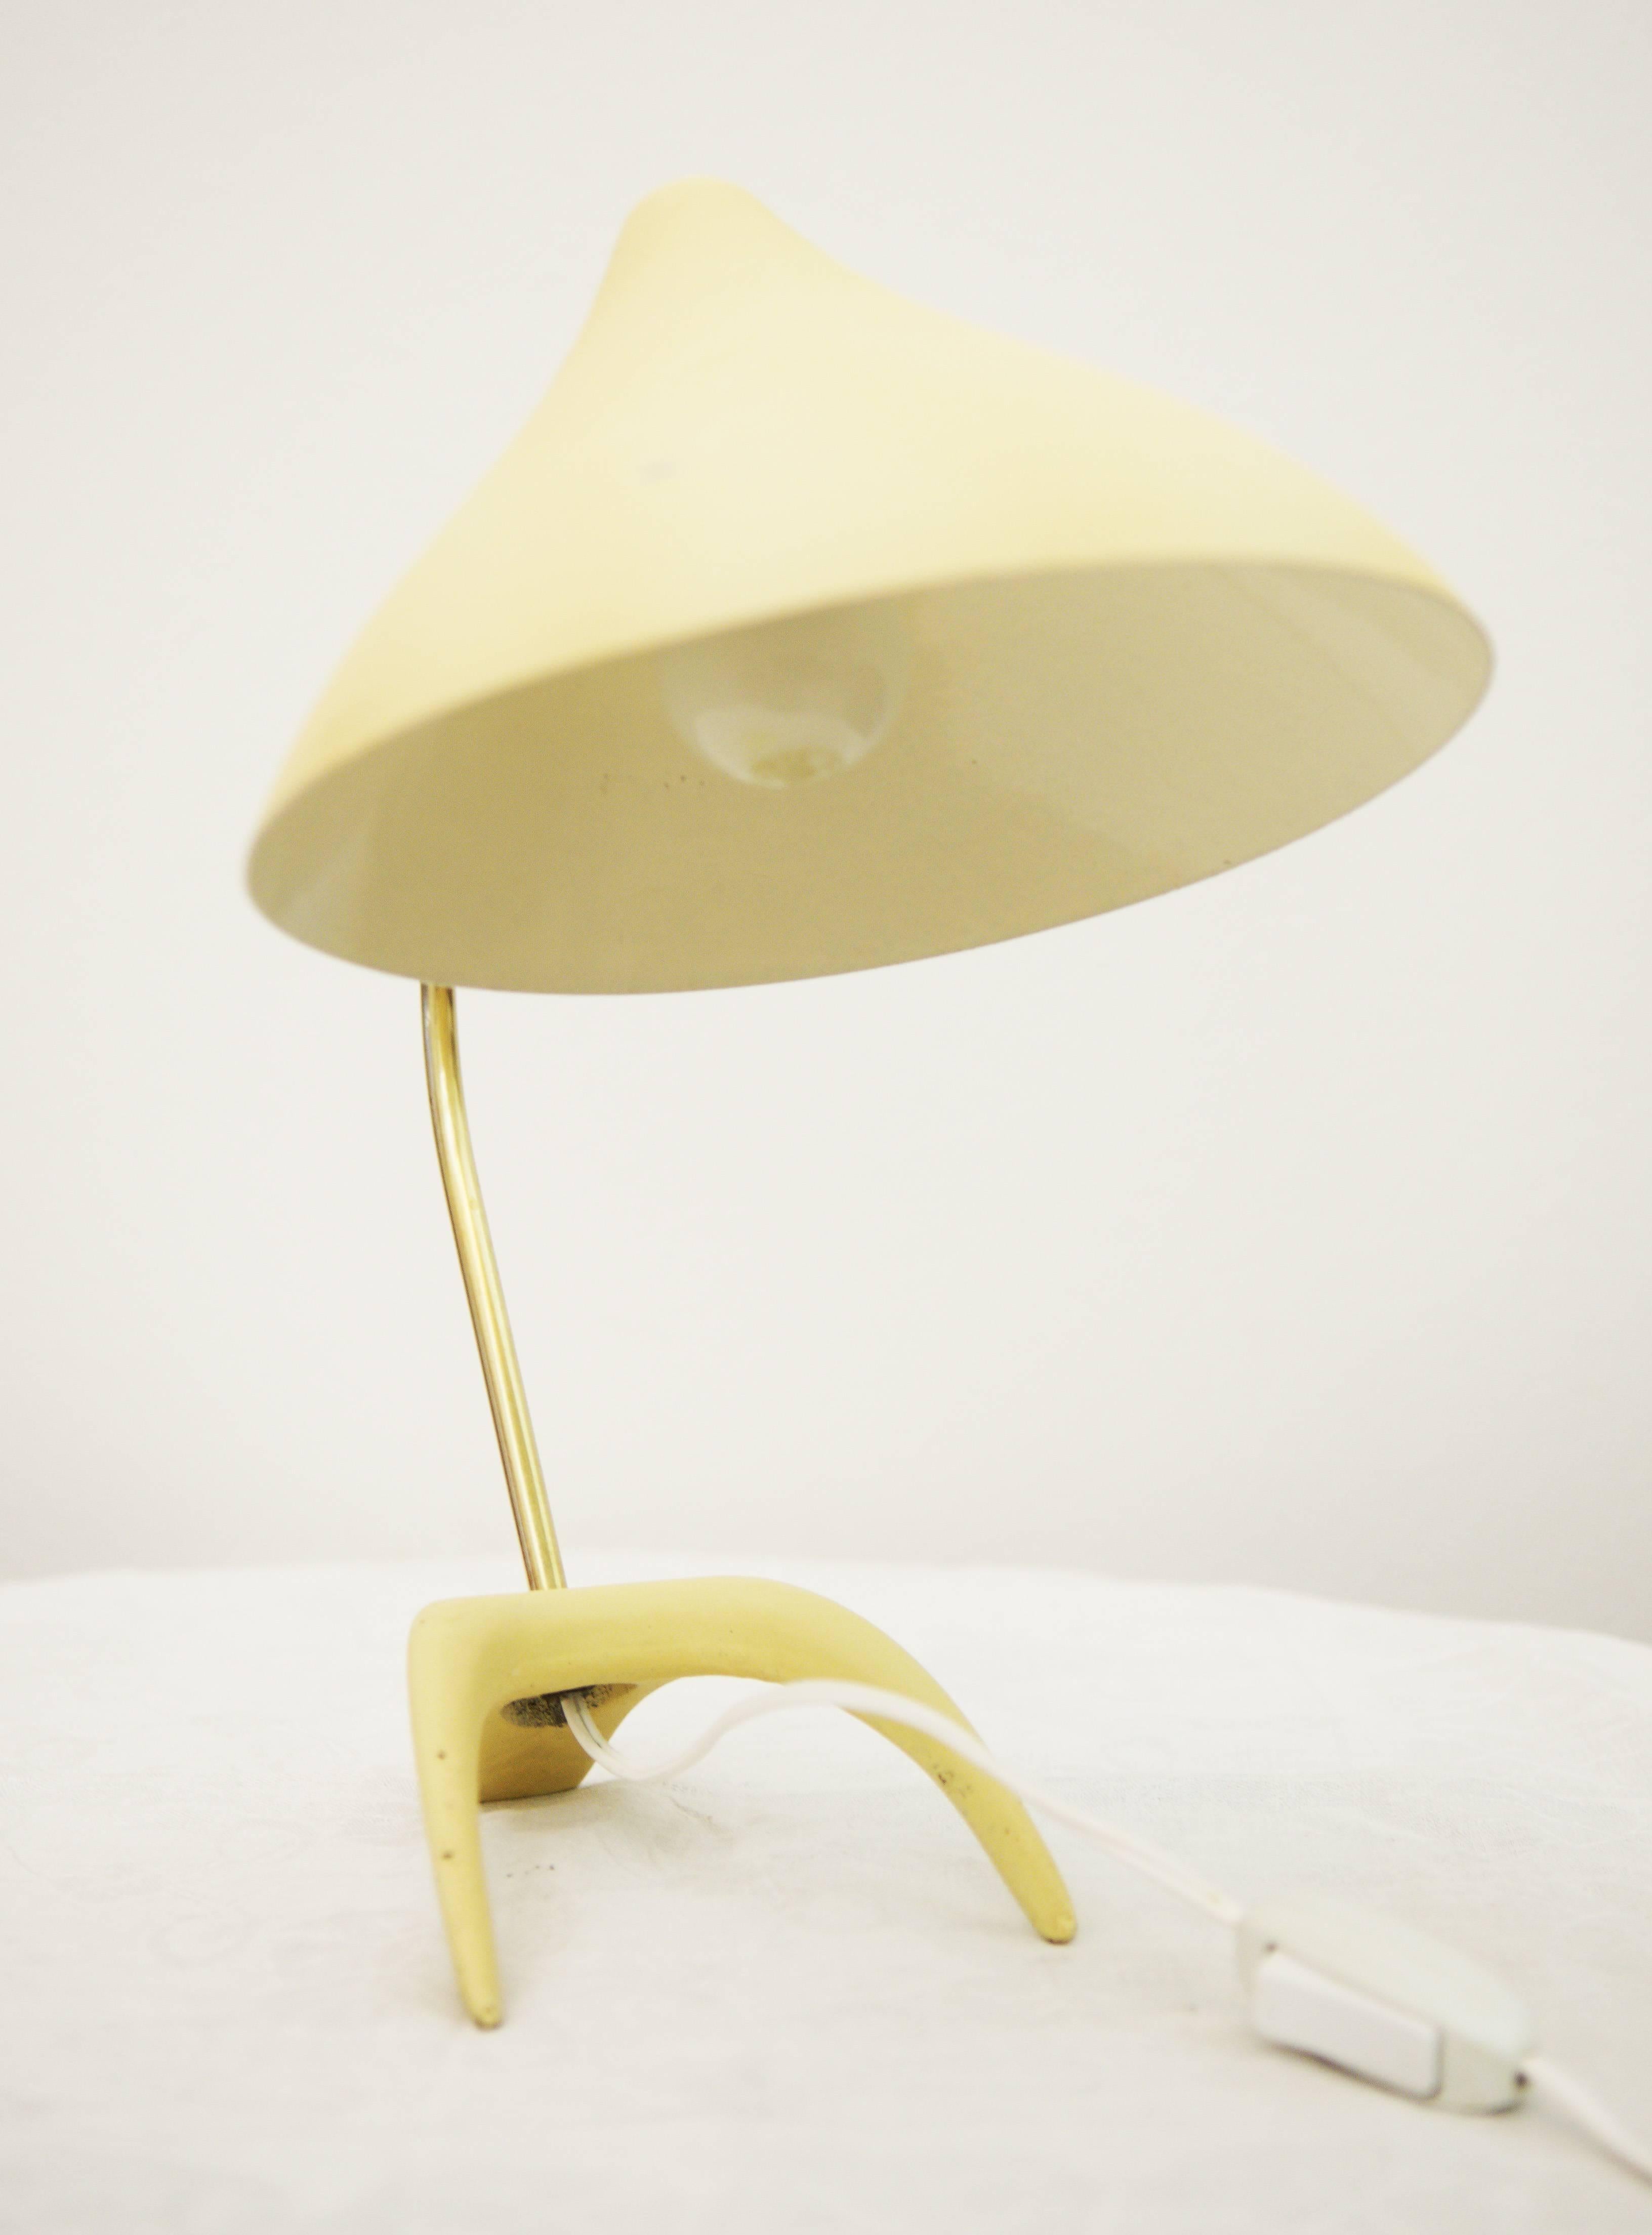 Dutch table lamp designed by Louis Kalff, 1950s.
Original condition with patina.